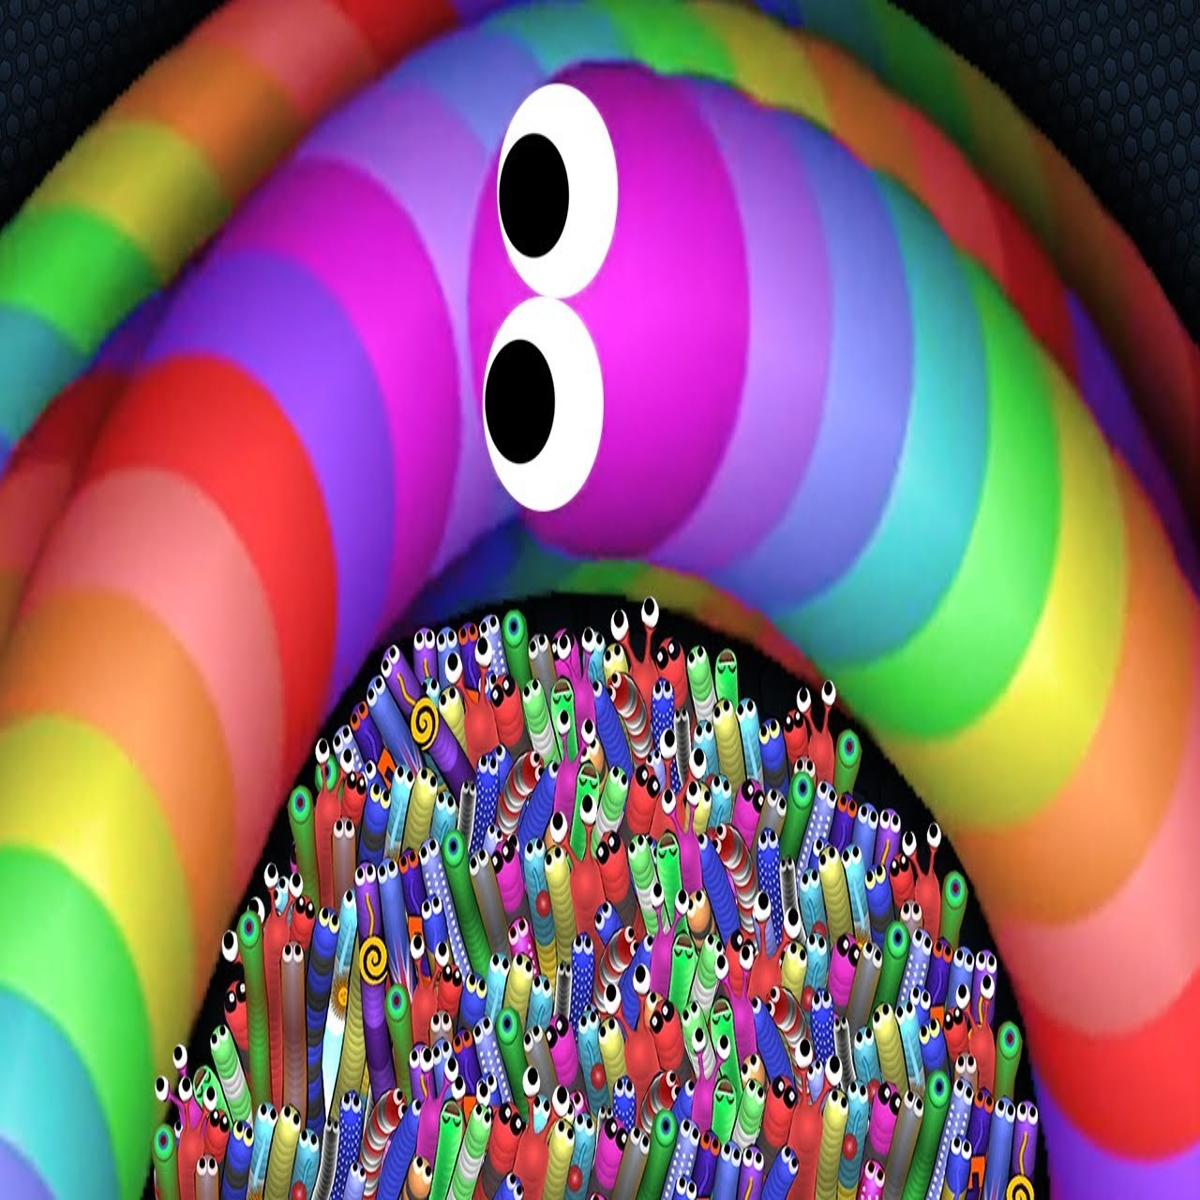 Slither.io codes – free skins, cosmetics, and more